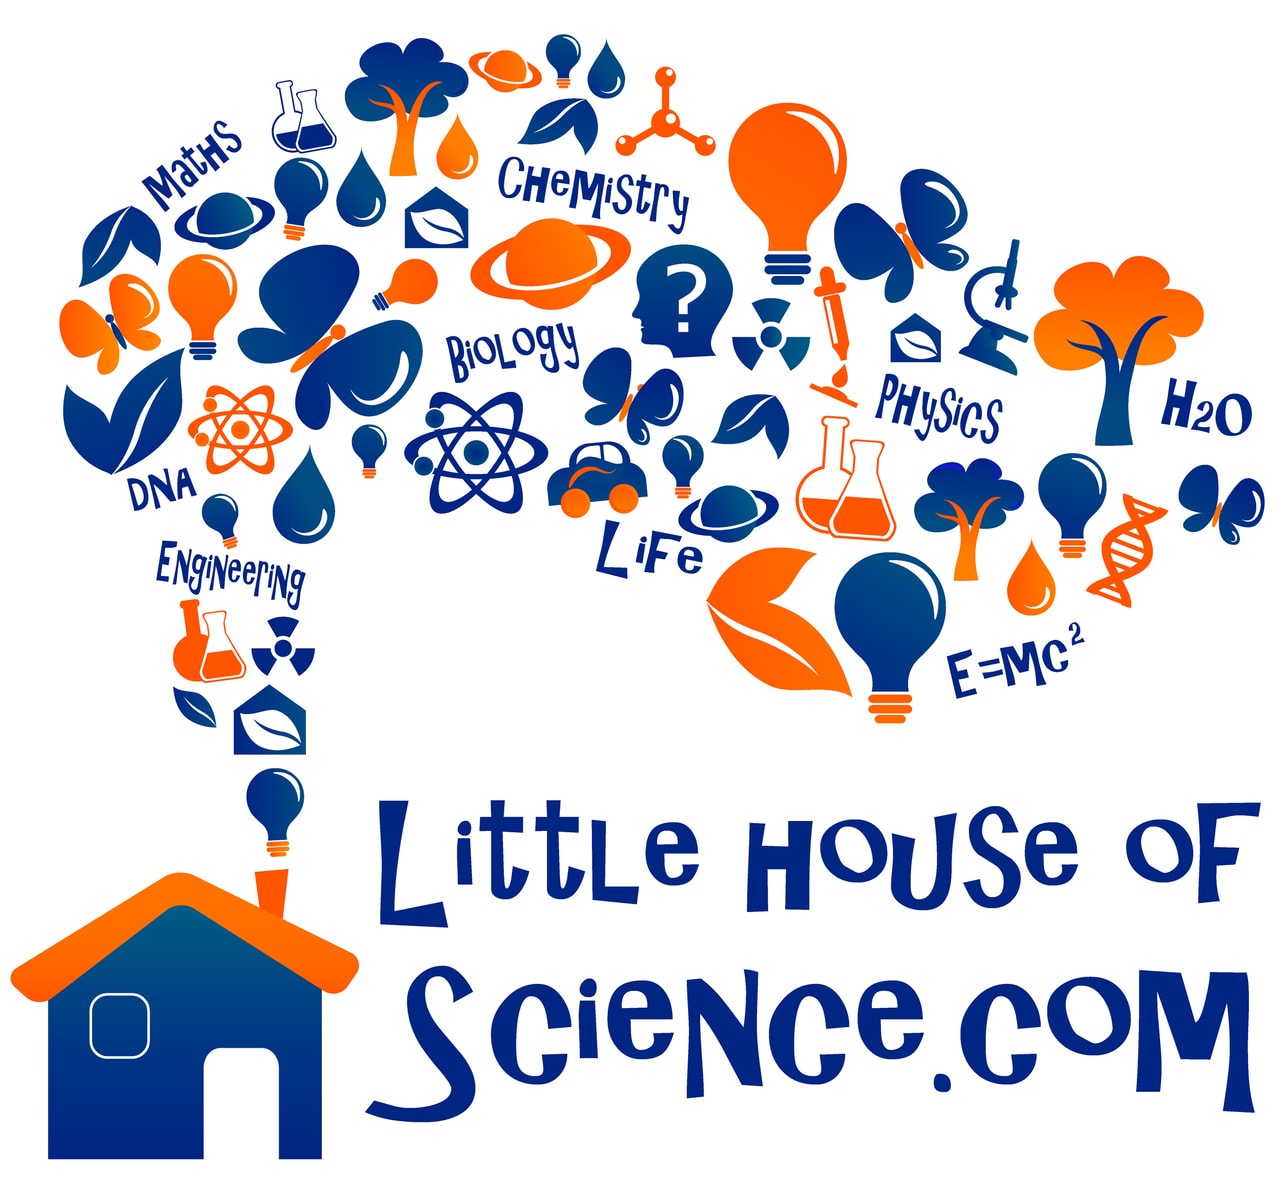 The Little House of Science